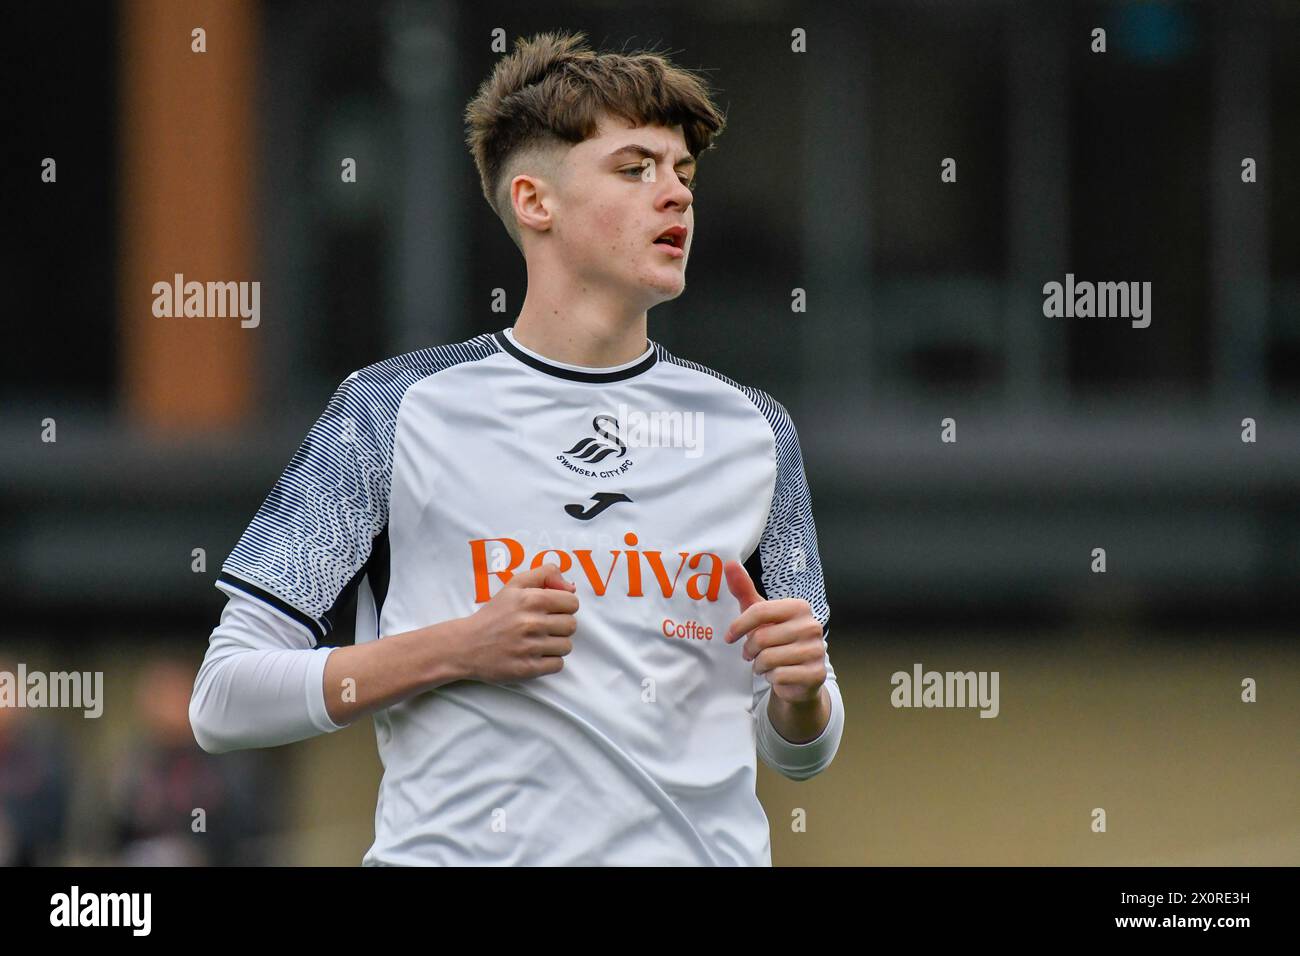 Landore, Swansea, Wales. 13 April 2024. Harvey Gray of Swansea City during the Under 18 Professional Development League match between Swansea City and Burnley at the Swansea City Academy in Landore, Swansea, Wales, UK on 13 April 2024. Credit: Duncan Thomas/Majestic Media/Alamy Live News. Stock Photo